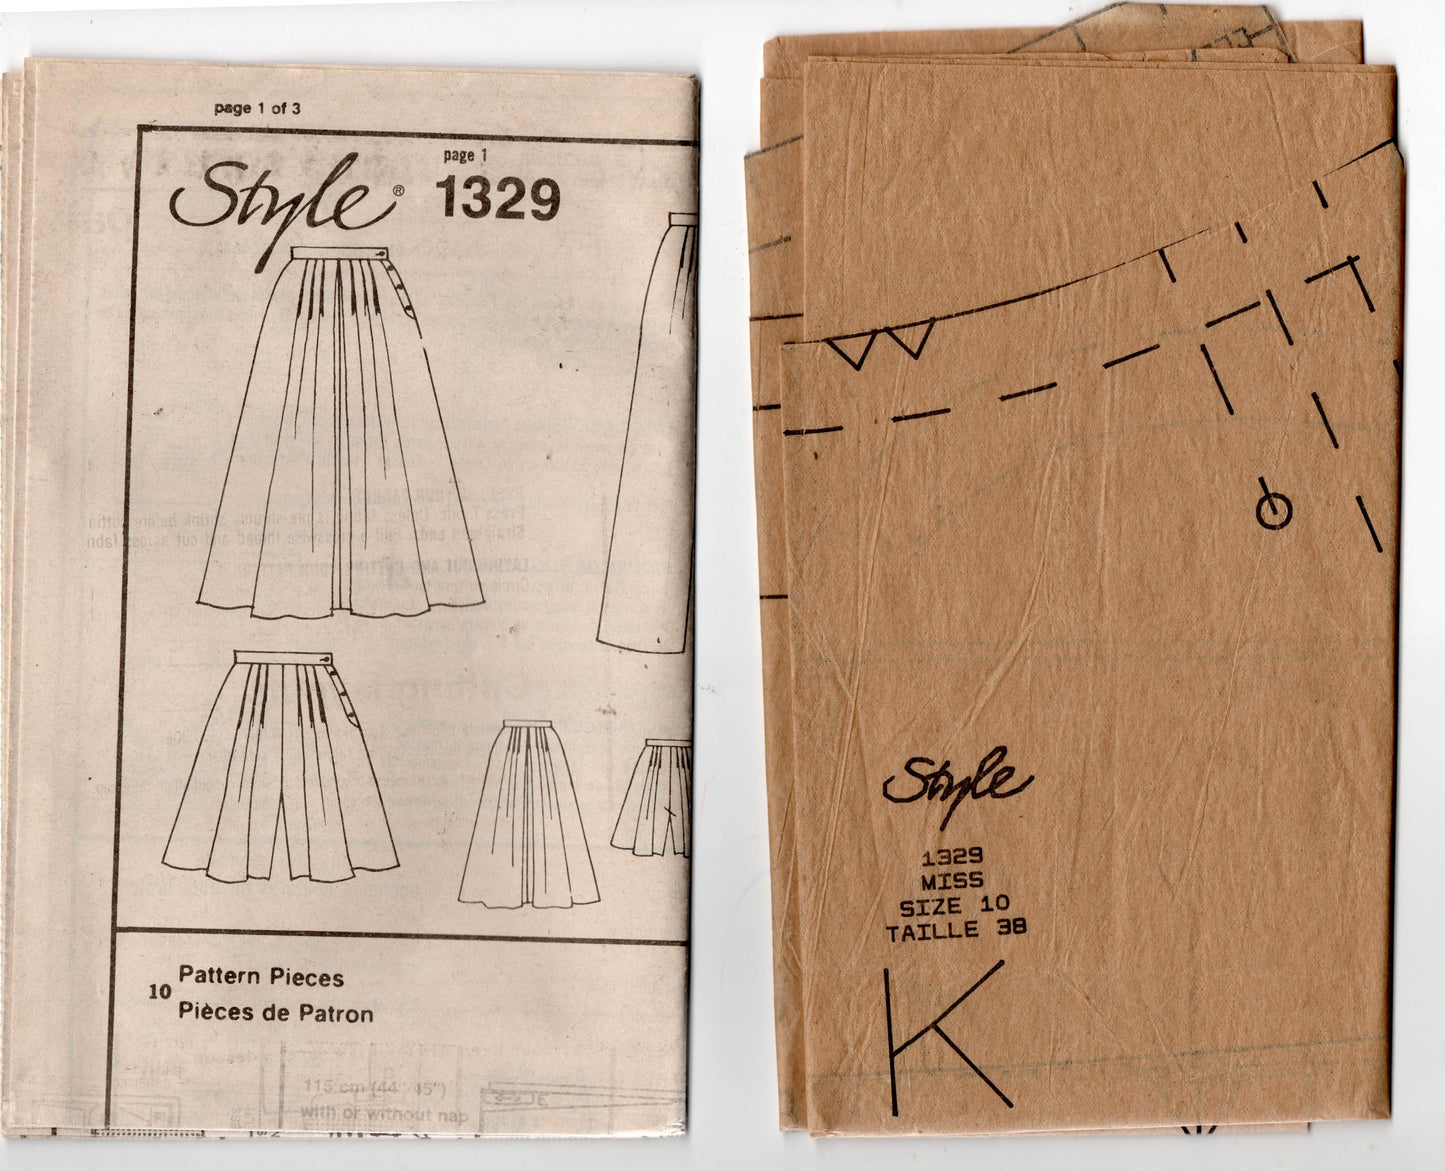 Style 1329 Womens Side Buttoned Skirt Culottes & Pants 1980s Vintage Sewing Pattern Size 10 Waist 25 inches